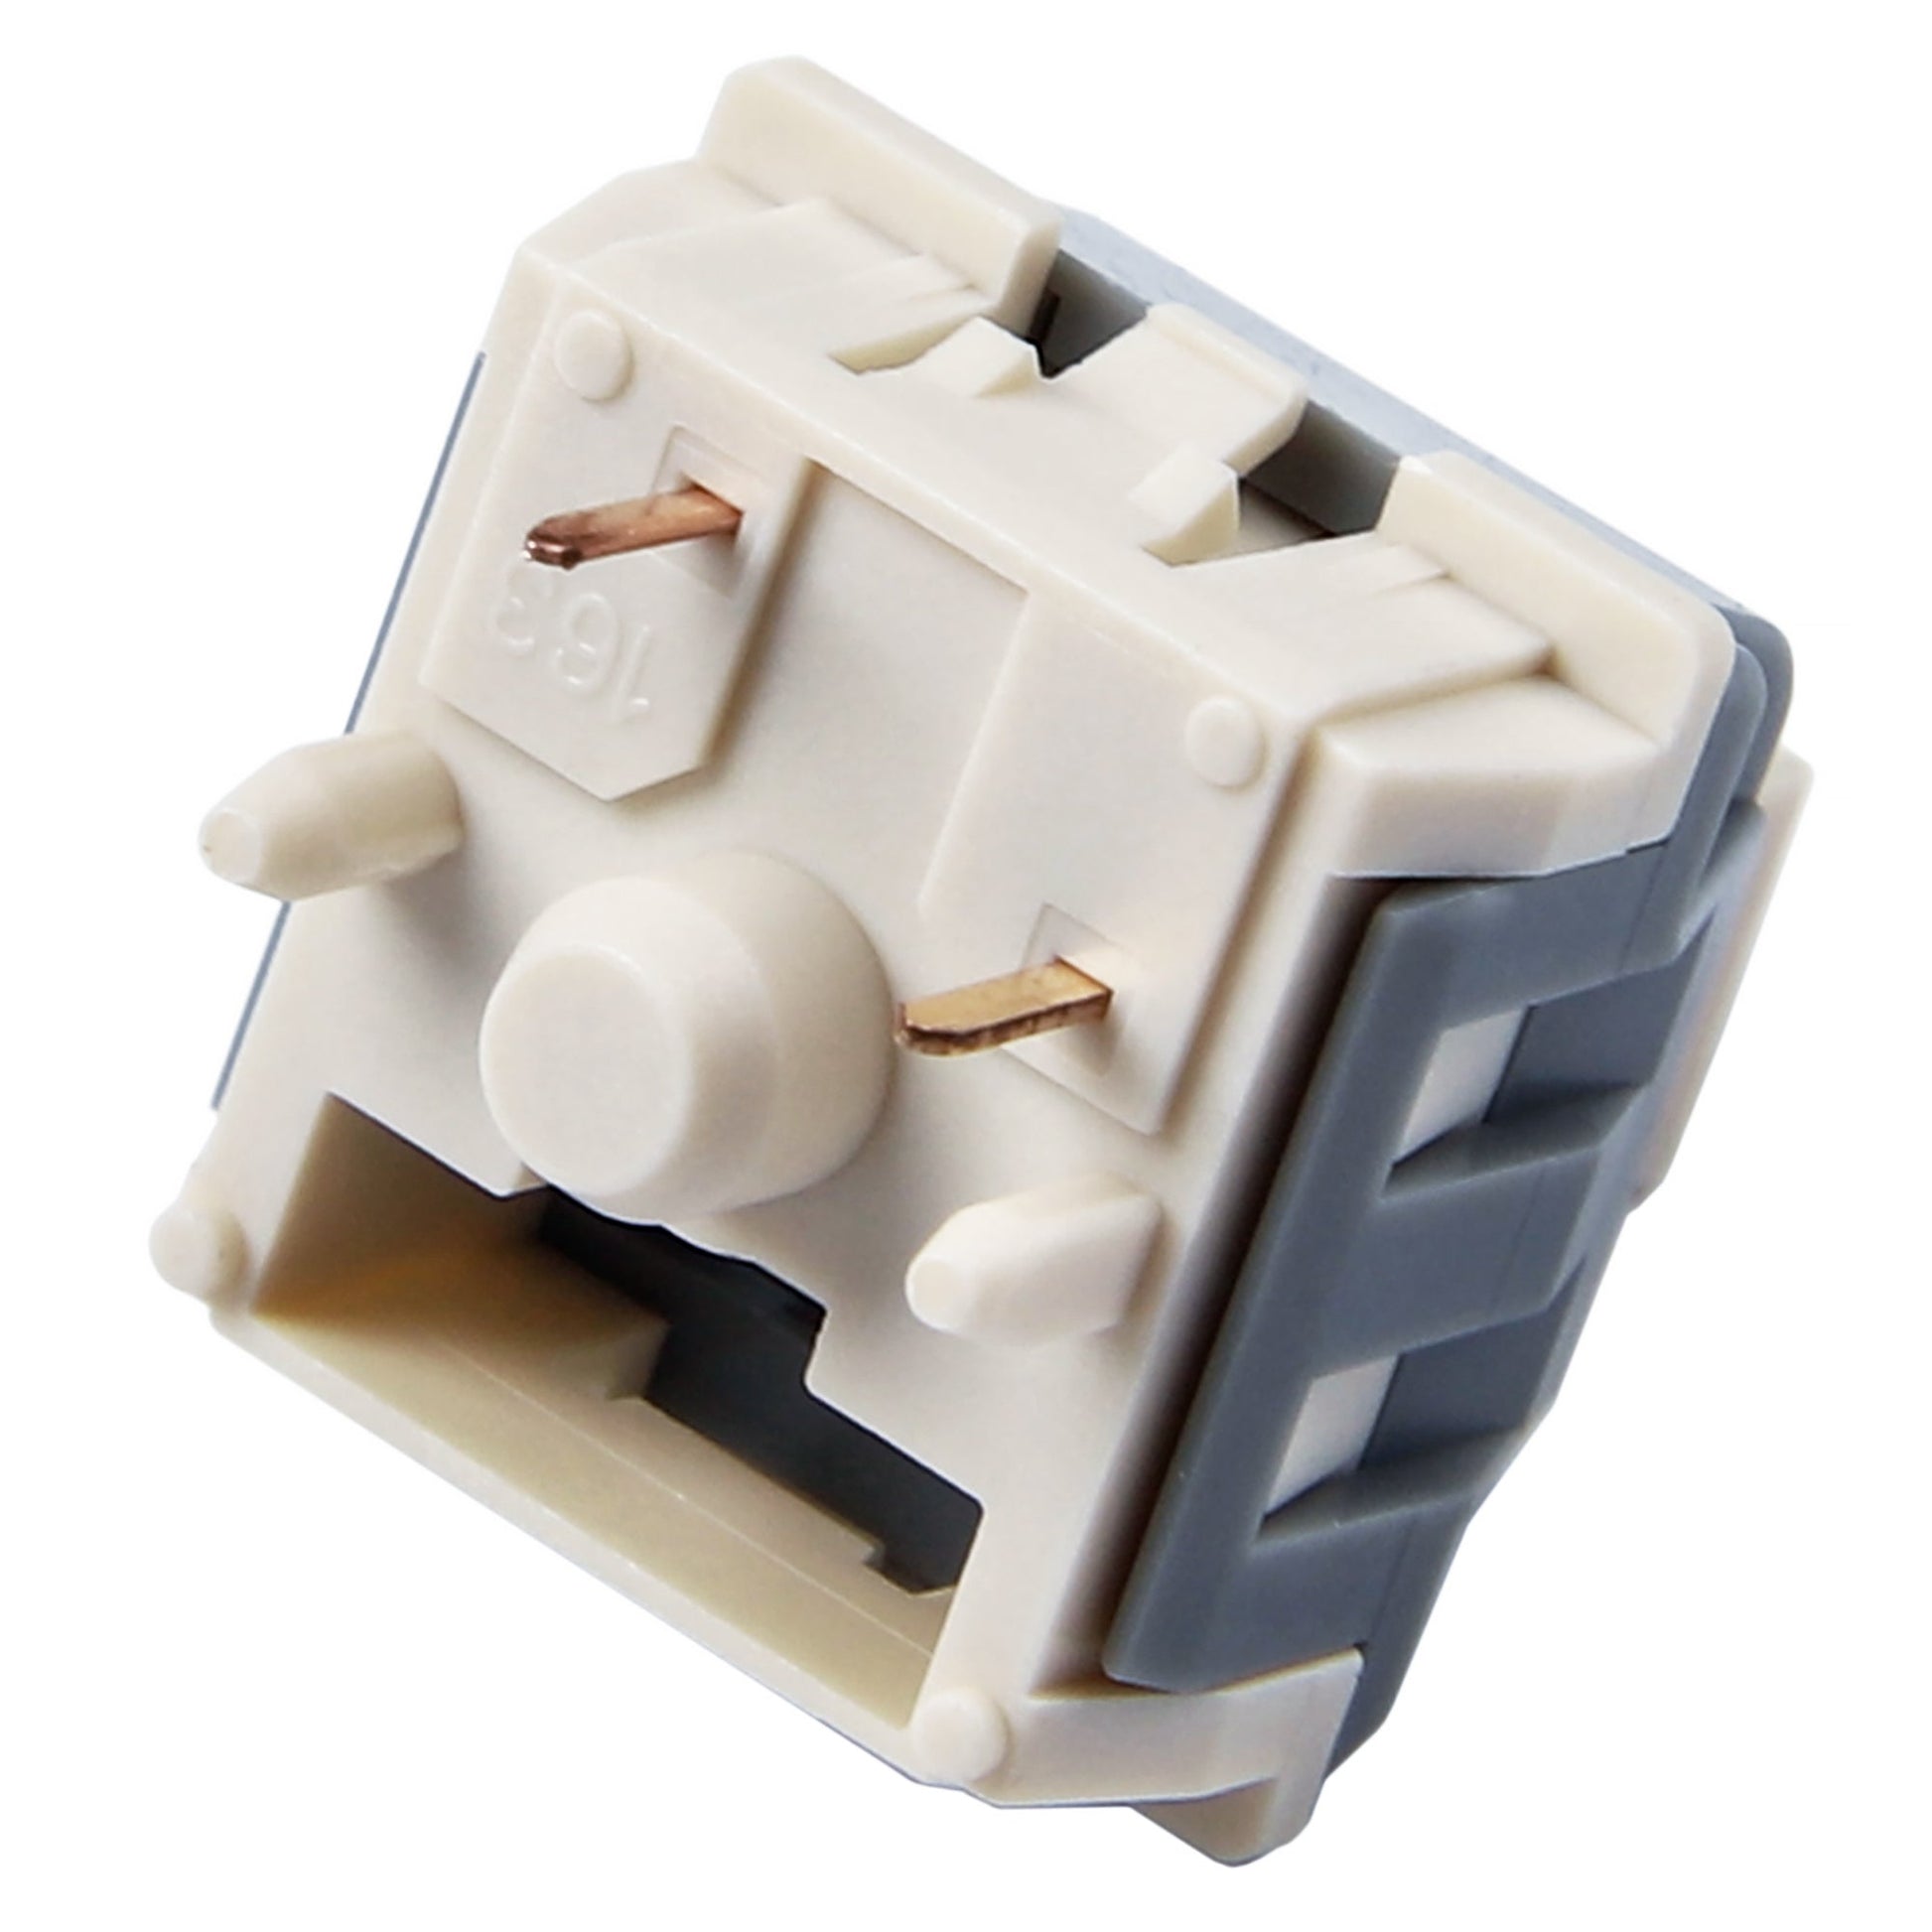 JWICK Box Semi-Silent Switches(5 Pin 62g Linear/RGB SMD) - IPOPULARSHOP